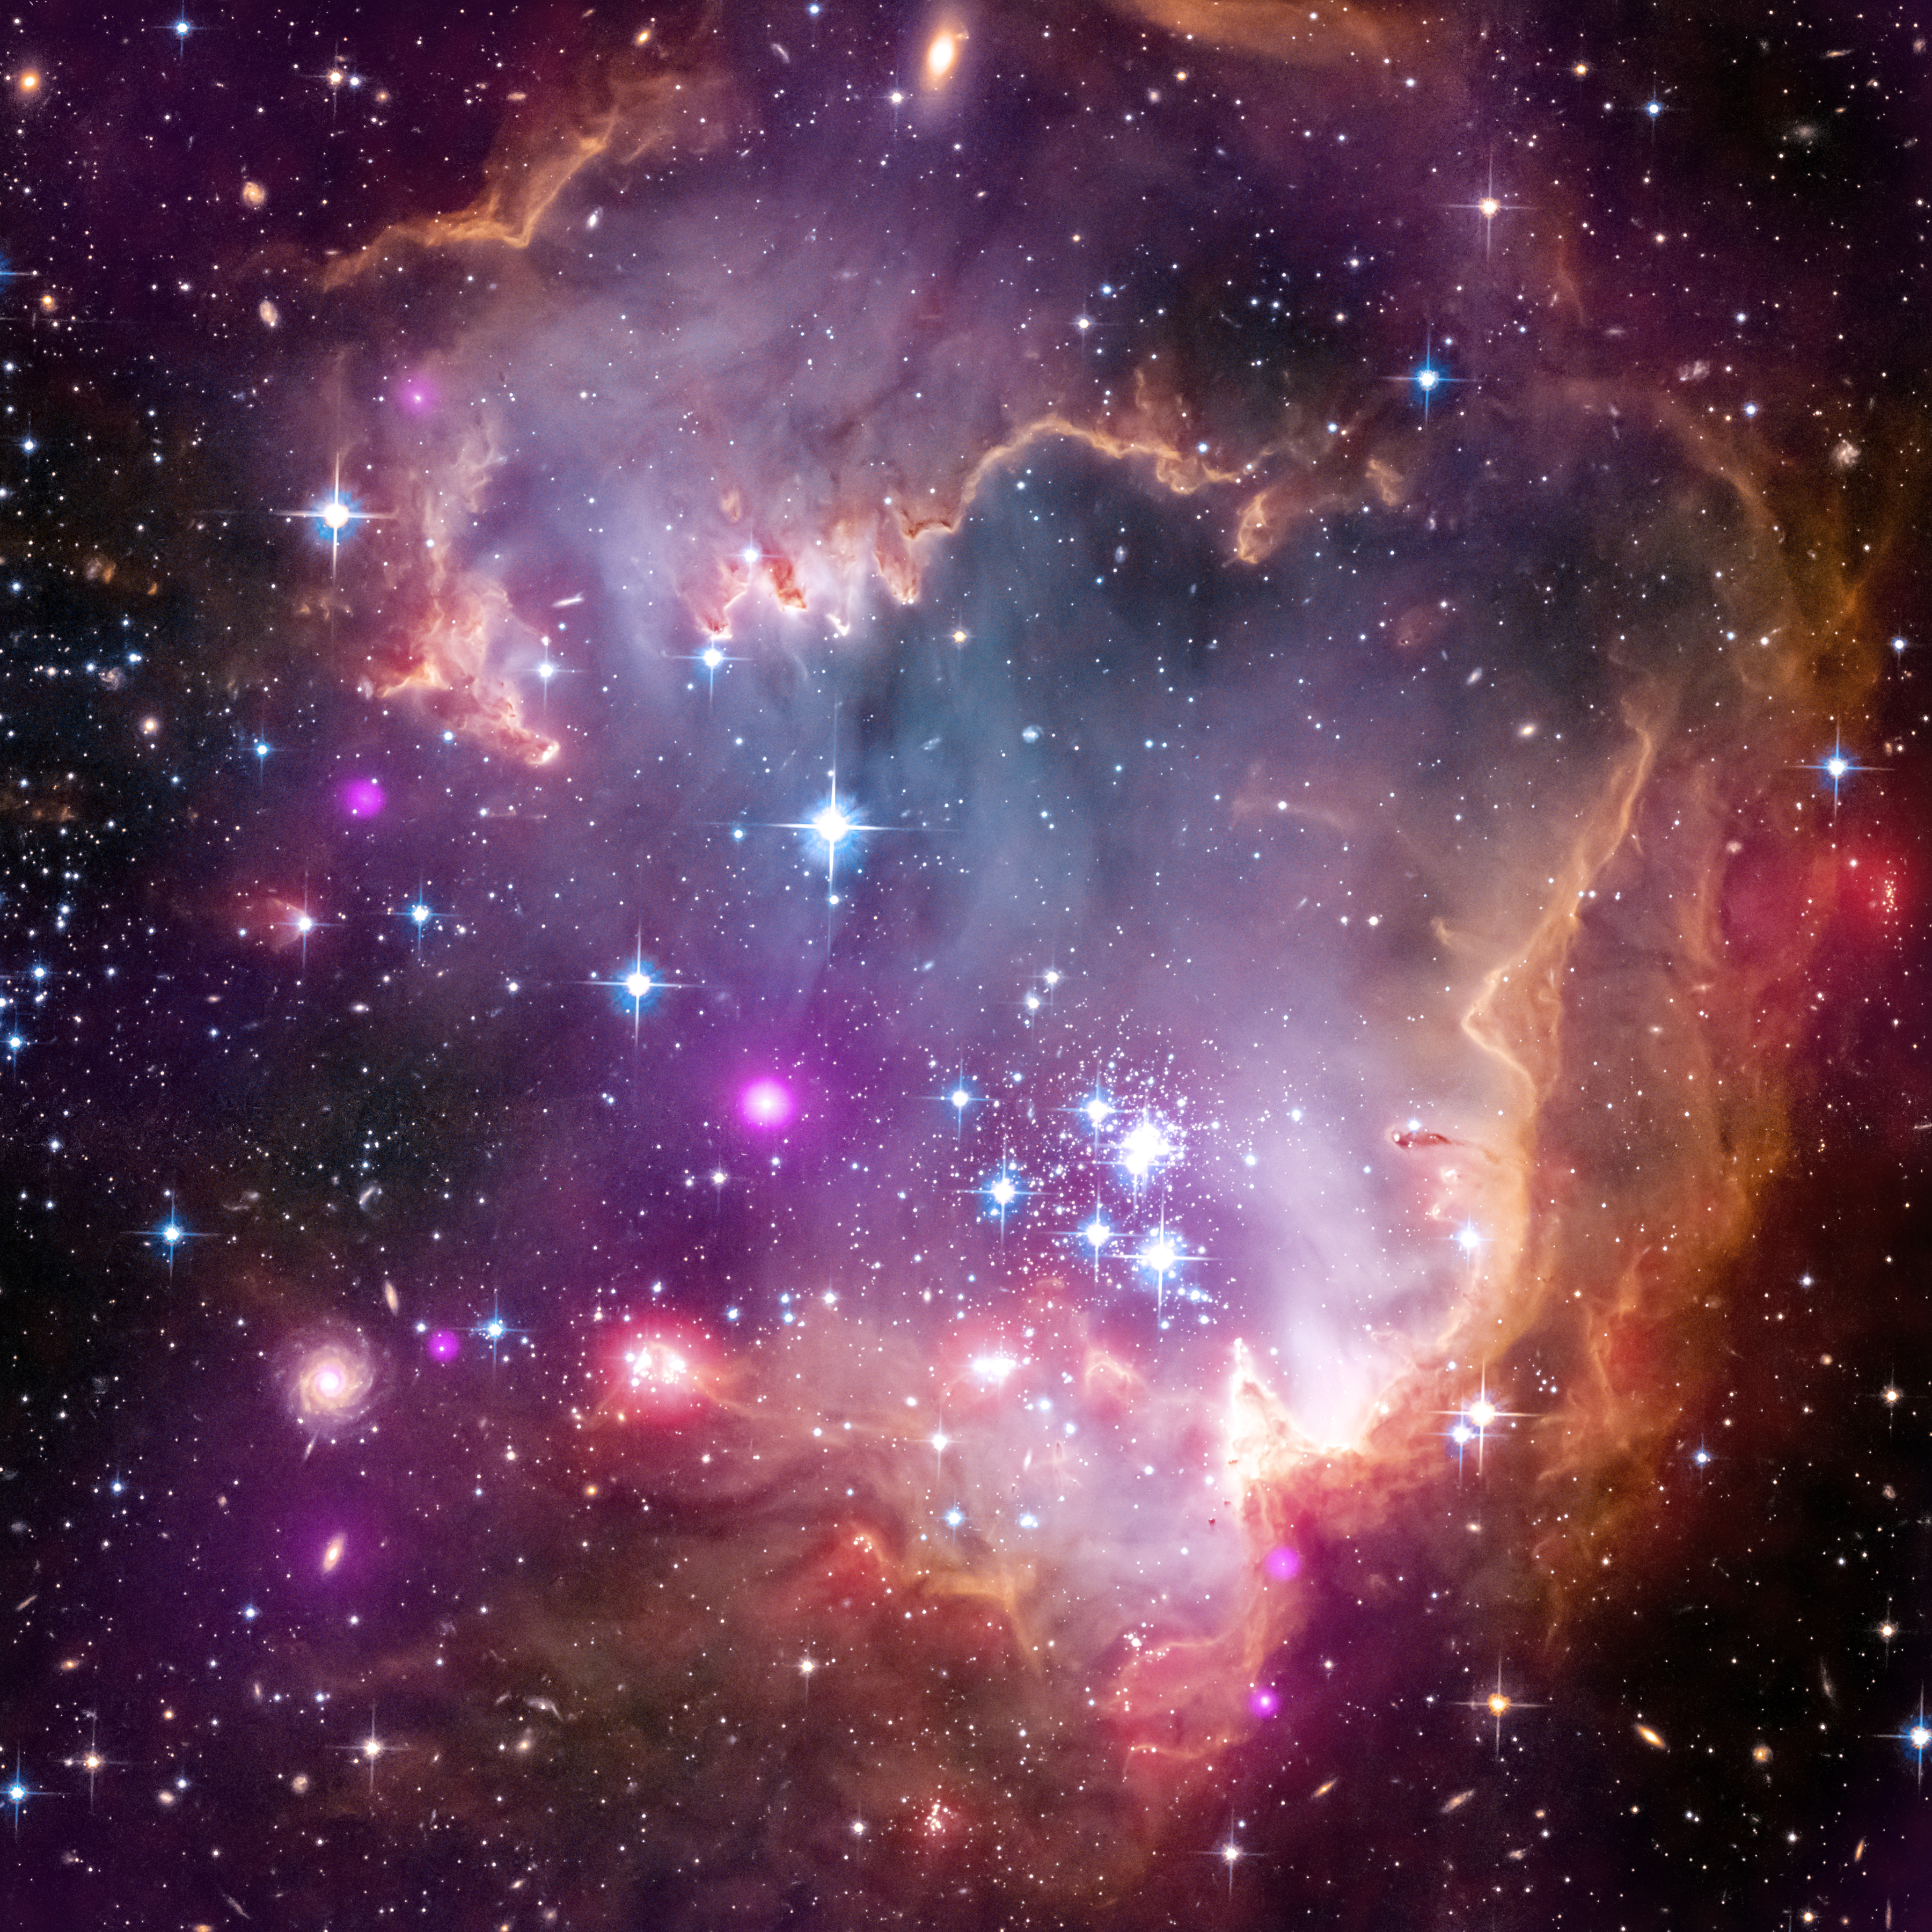 Star birth: Stars forming in a nearby galaxy show we're more alike ...